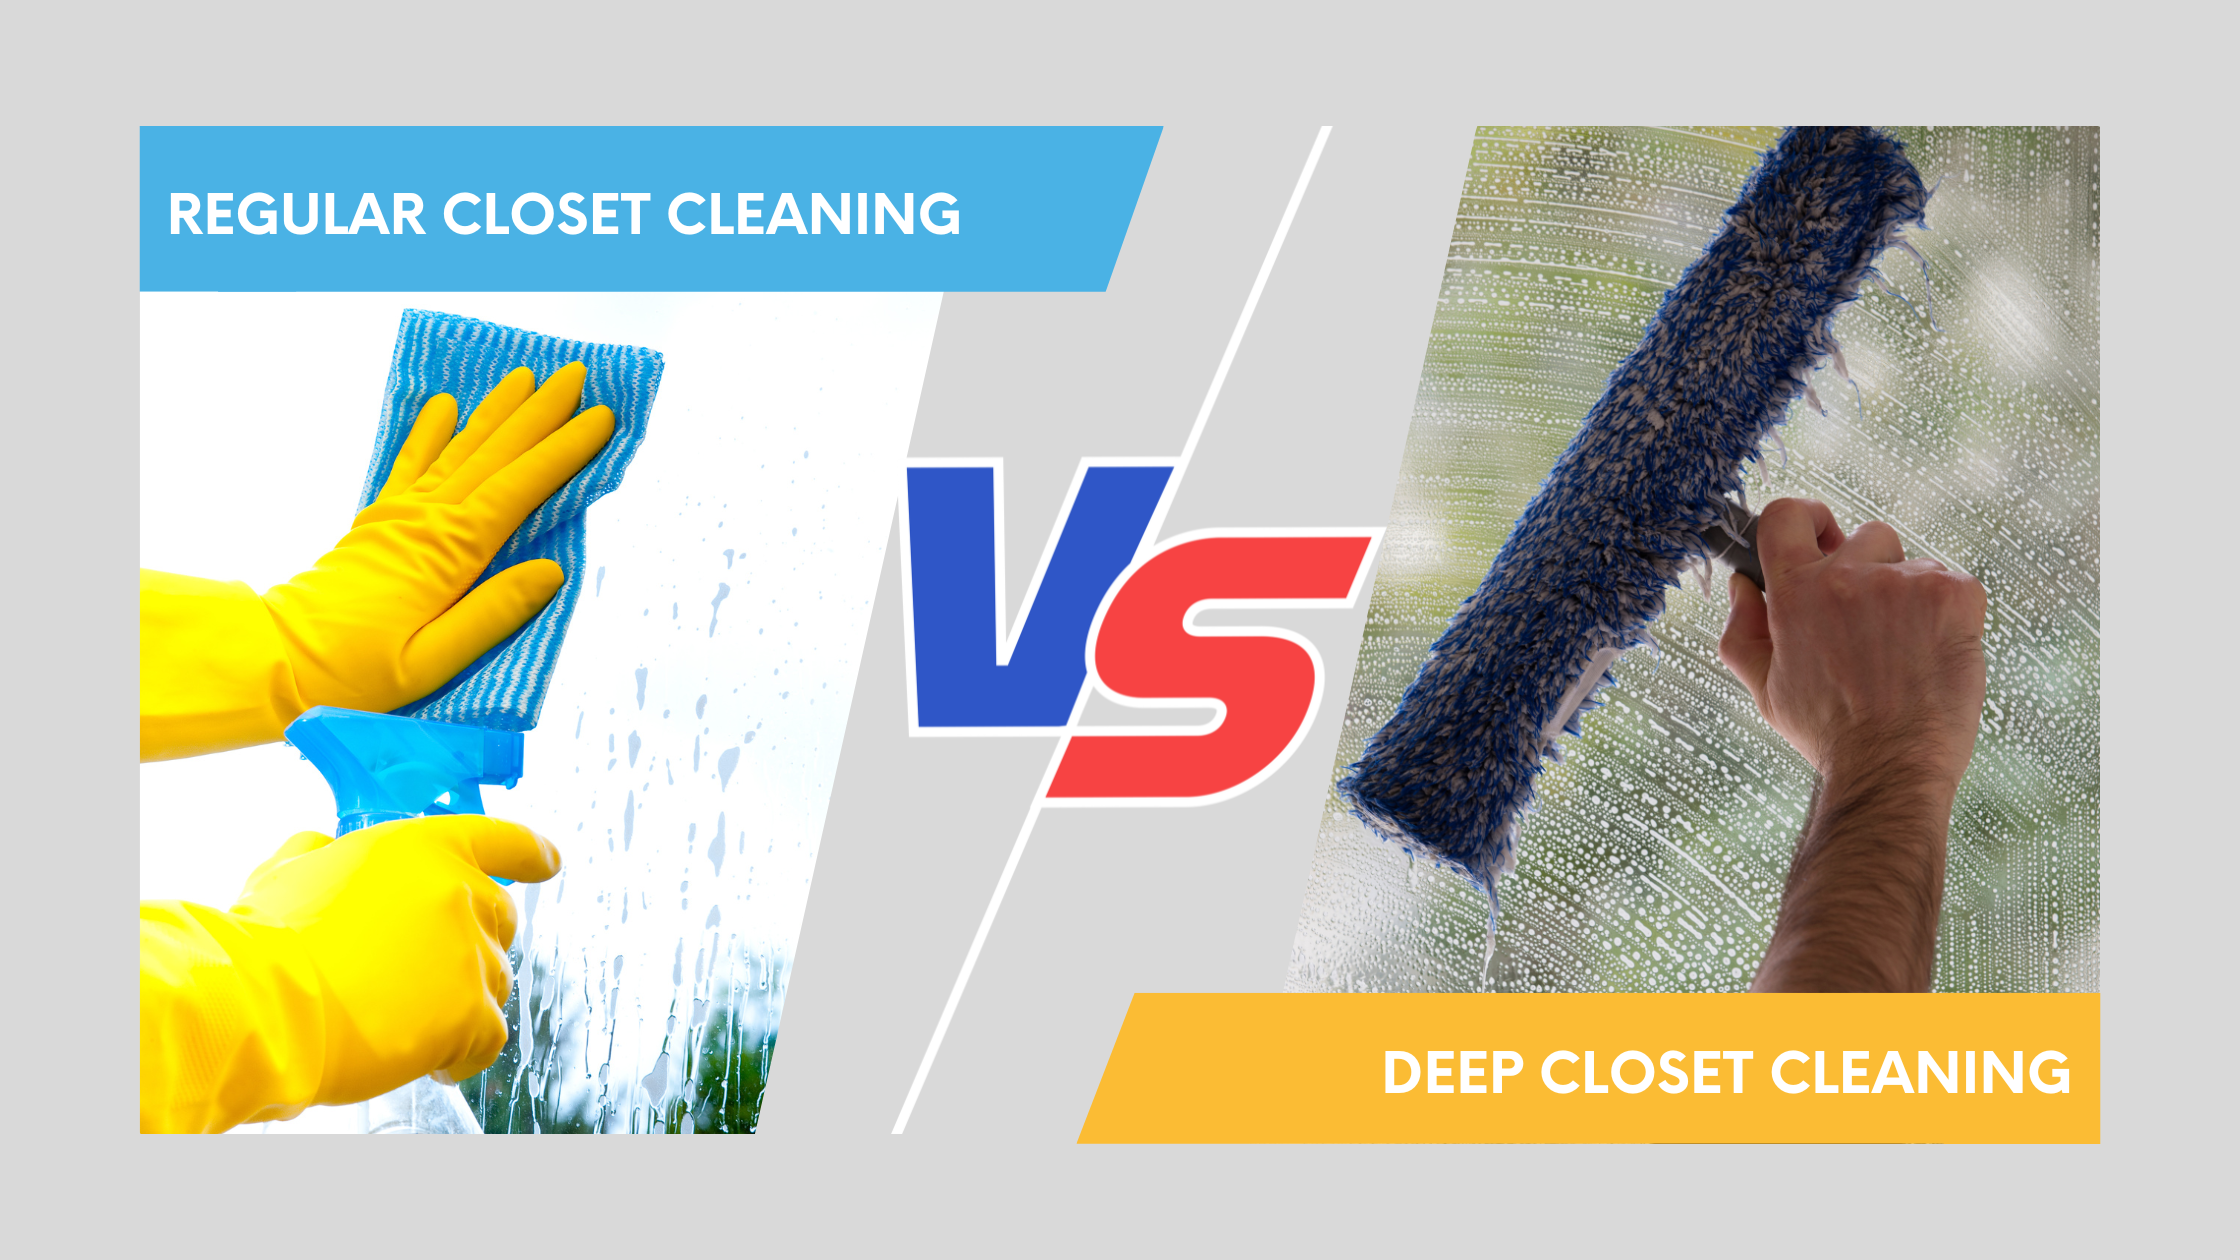 Regular cleaning vs deep cleaning of closets